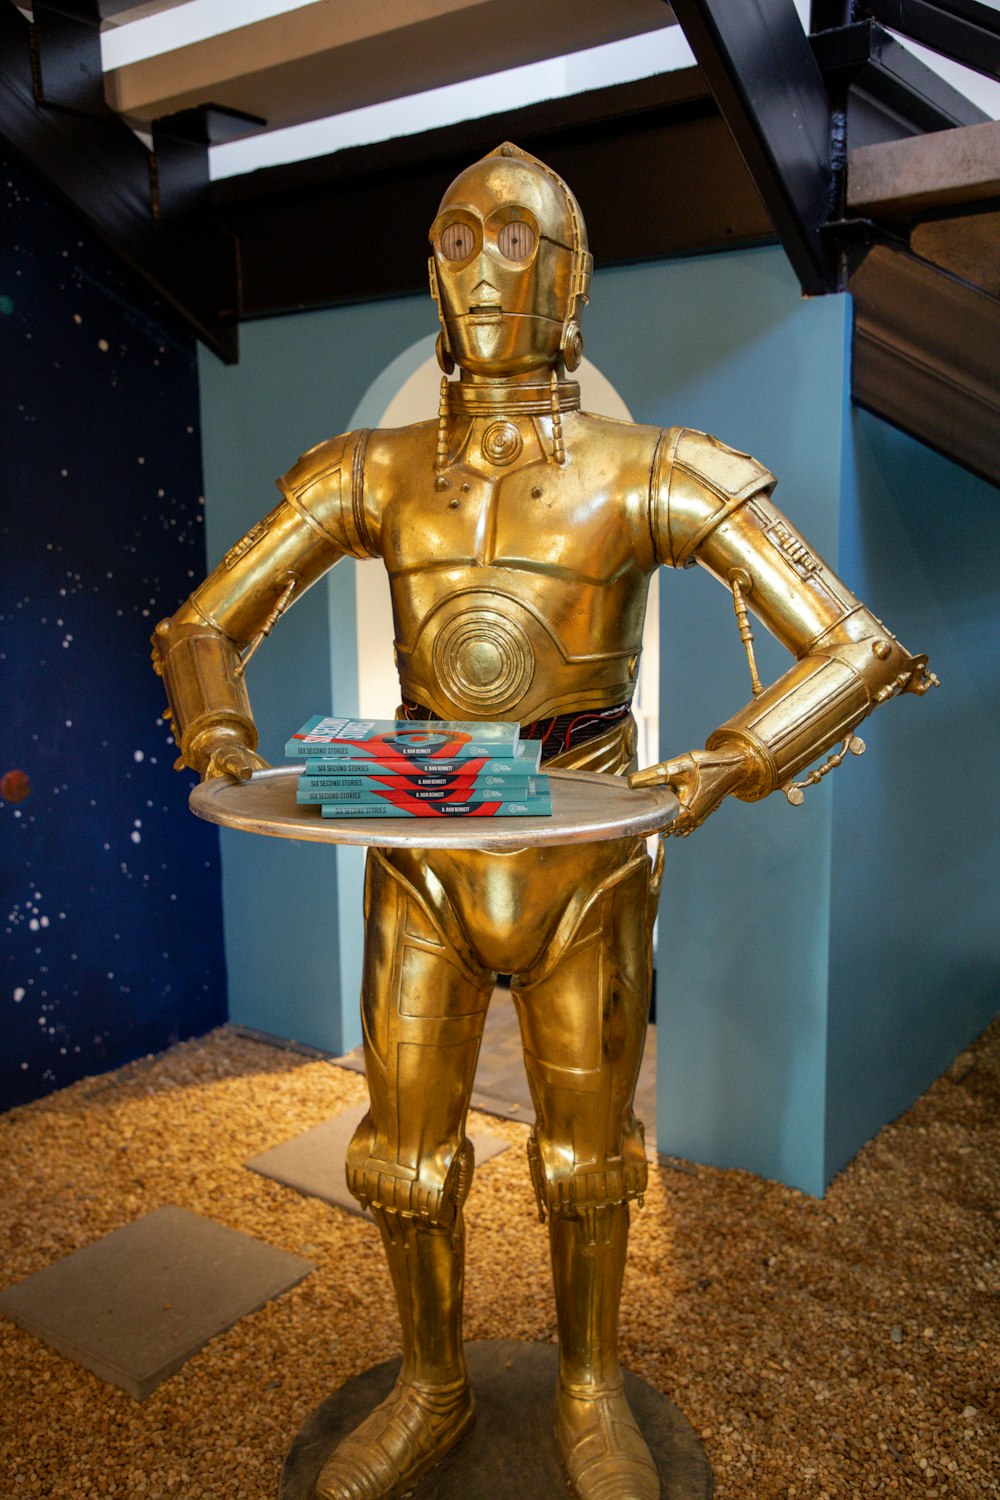 a star wars character holding a cake on a plate